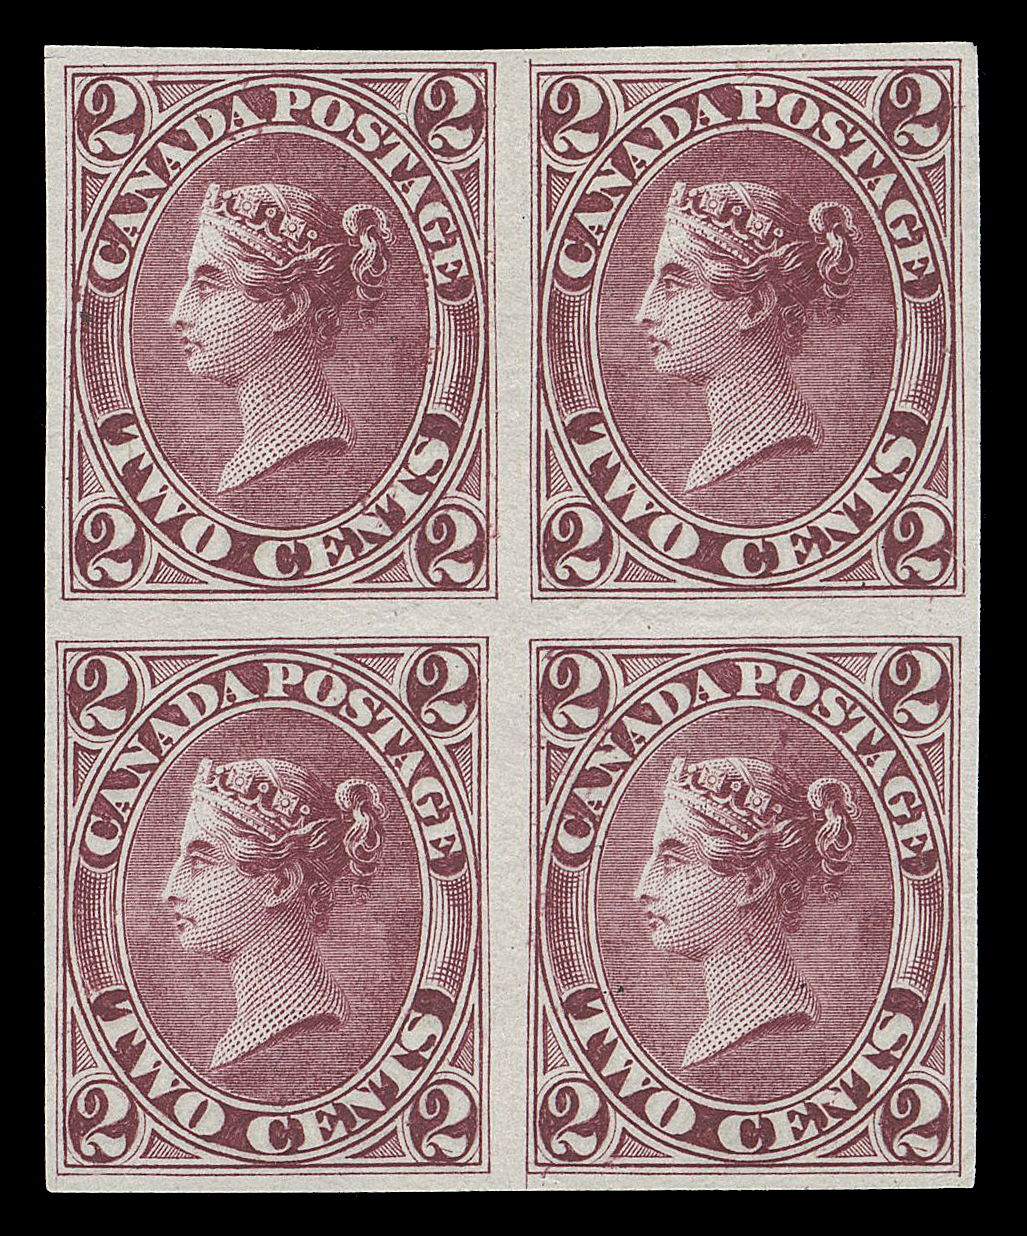 TWO CENTS  20TC + varieties,Trial colour plate proof block printed in dark rose on india paper, lower right stamp shows both a long extended vertical frameline at lower left and dash in lower right "2" variety; extended vertical frameline at UR and dash in lower right "2" varieties can also be seen on UR and LL proofs respectively, VF (Unitrade cat. as normal proofs)